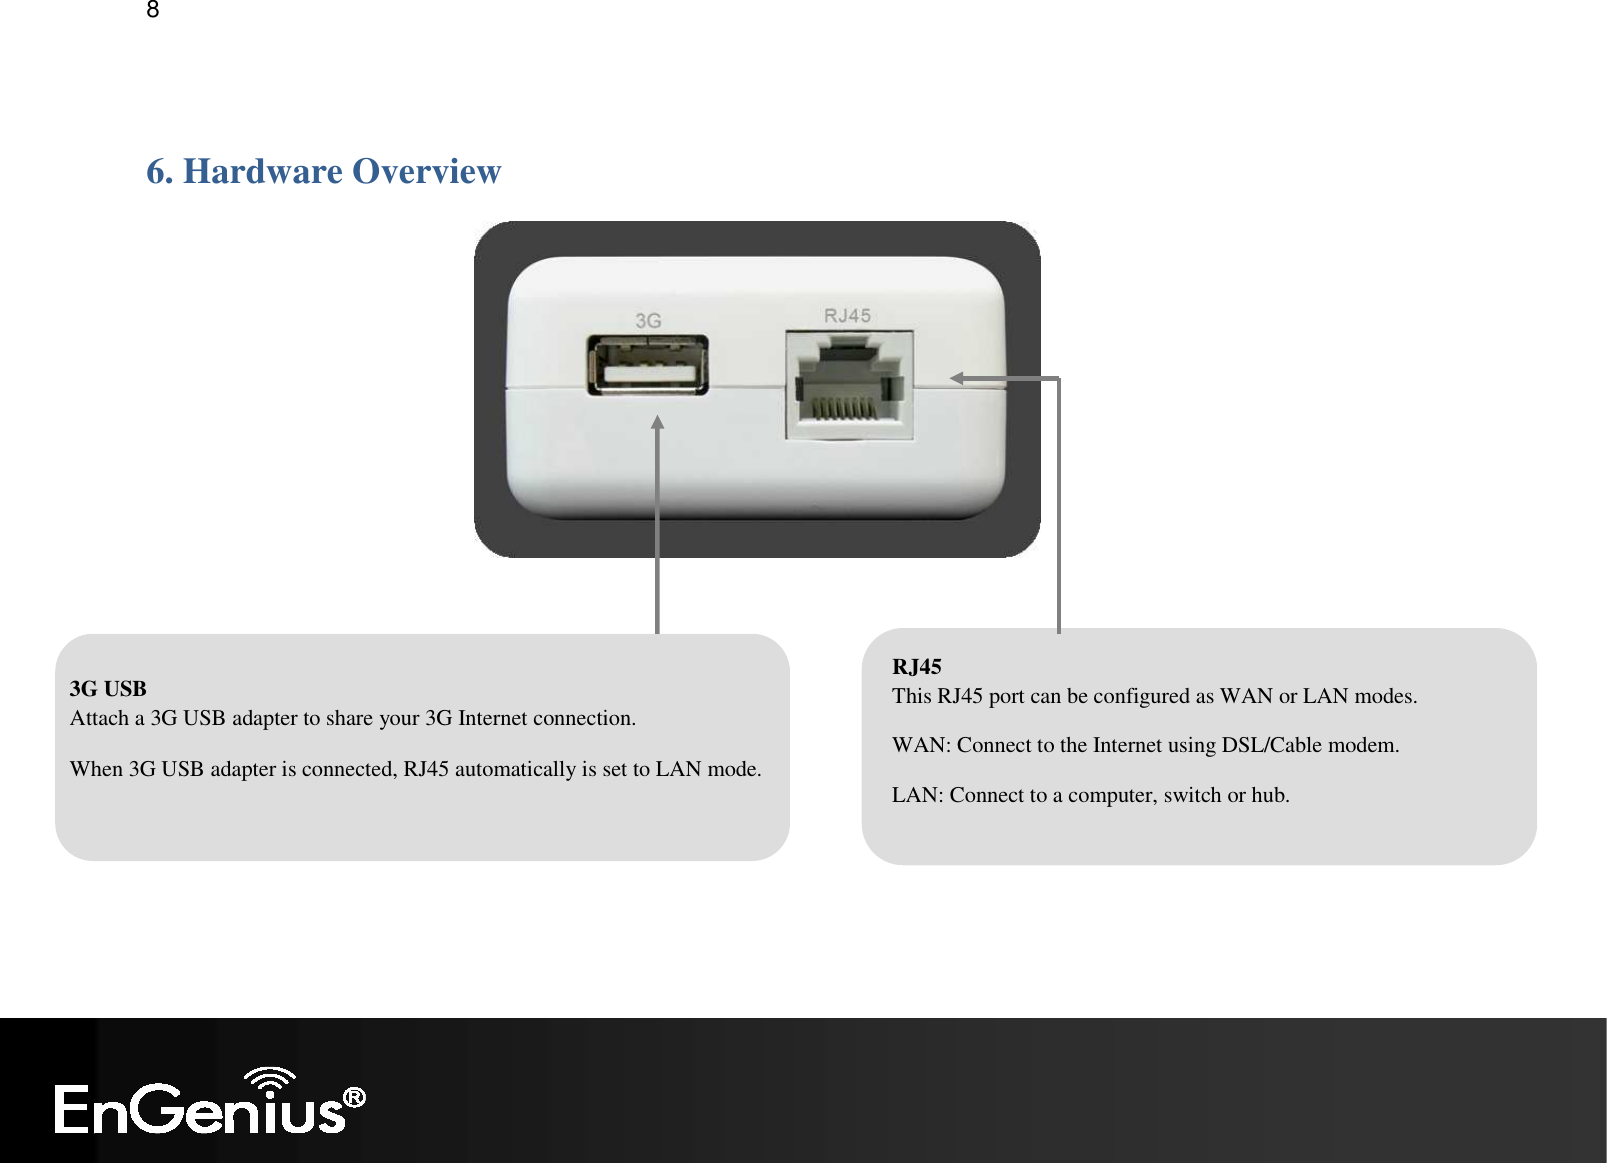   8  6. Hardware Overview  RJ45 This RJ45 port can be configured as WAN or LAN modes. WAN: Connect to the Internet using DSL/Cable modem. LAN: Connect to a computer, switch or hub.  3G USB Attach a 3G USB adapter to share your 3G Internet connection. When 3G USB adapter is connected, RJ45 automatically is set to LAN mode. 